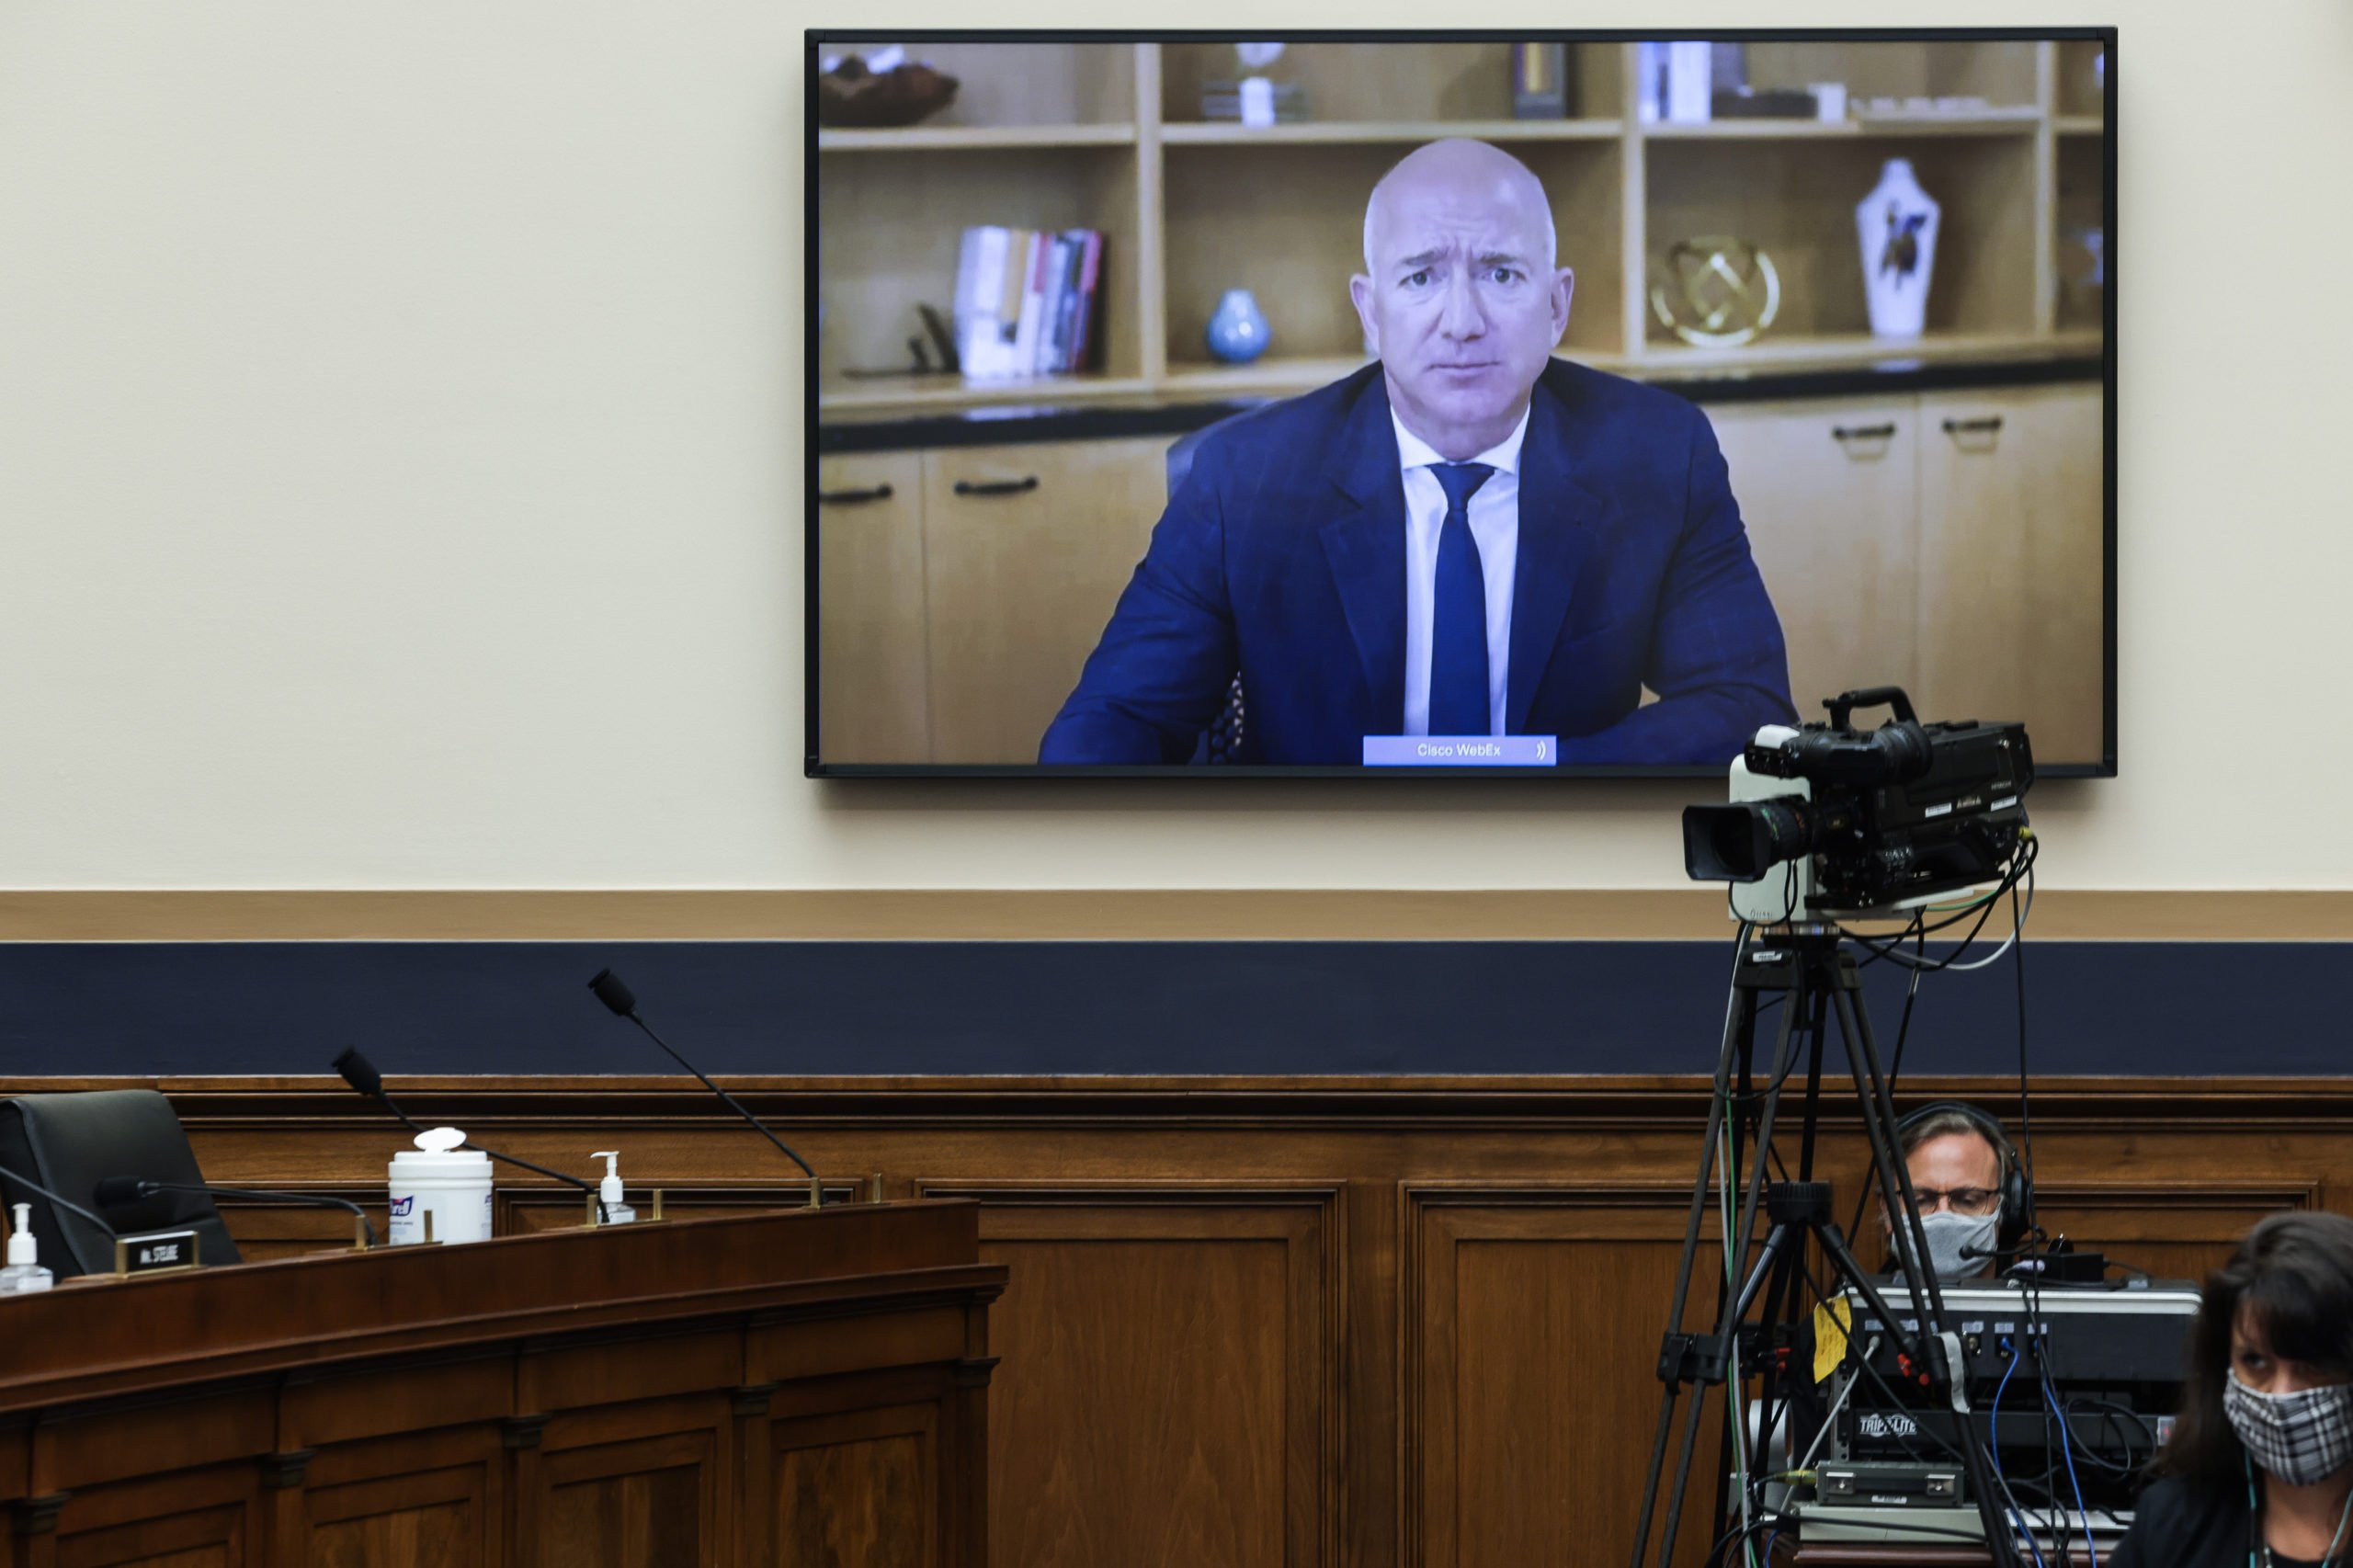 Amazon CEO Jeff Bezos testifies during a House hearing on July 29. (Graeme Jennings/Pool/Getty Images)